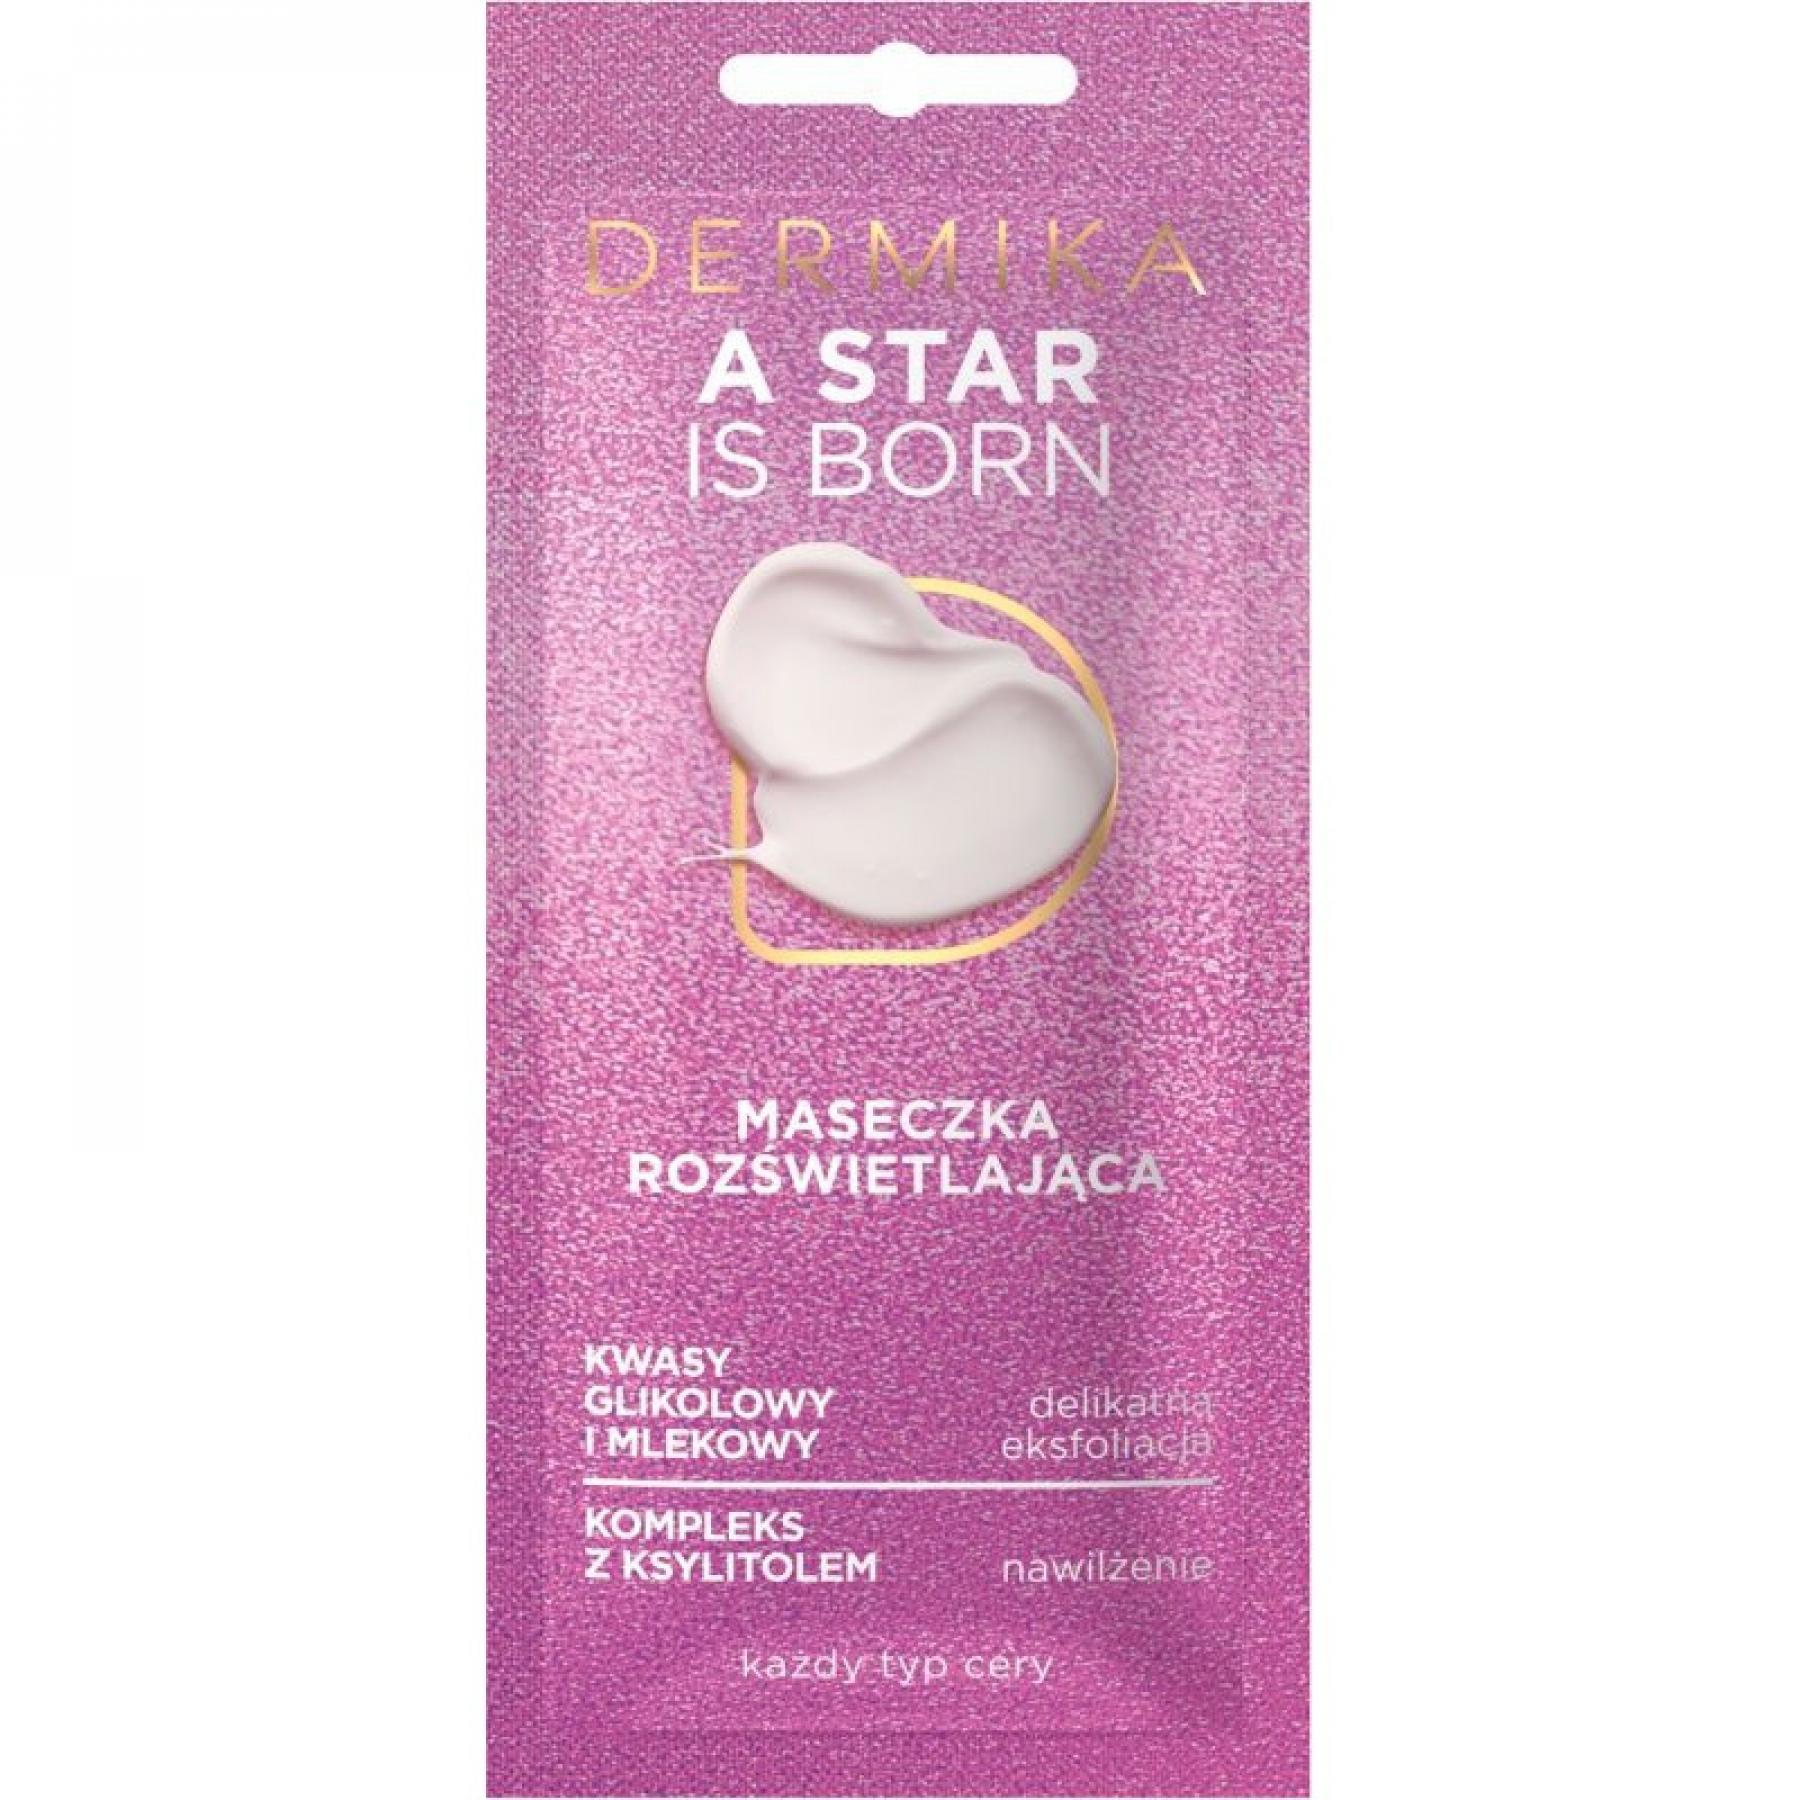 A star is born face mask 10ml